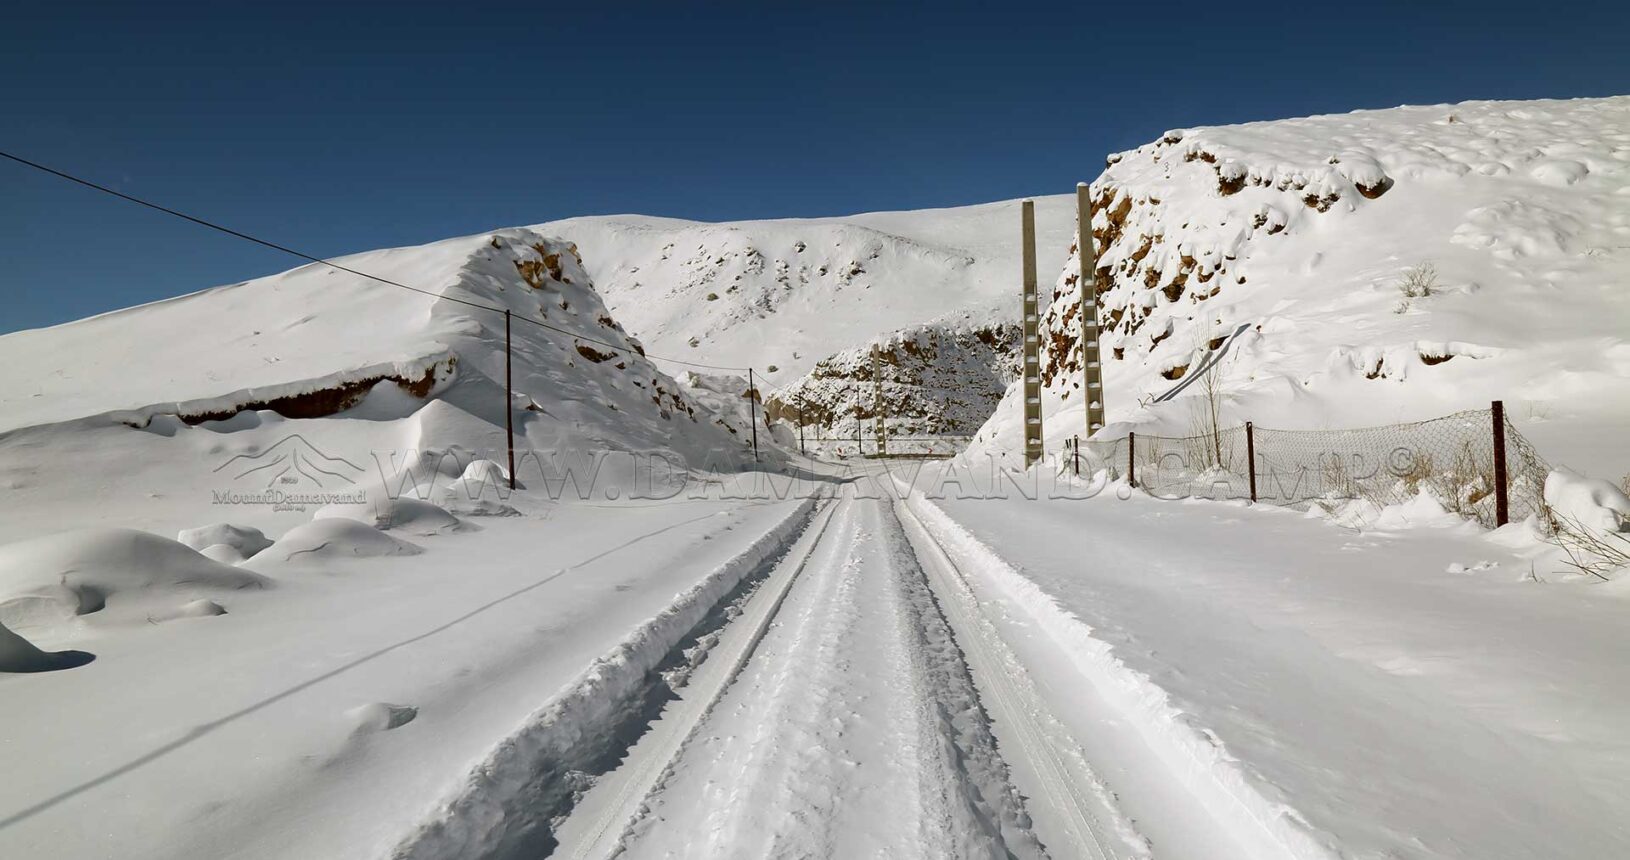 The road near Camp 1 of Mount Damavand is blanketed in a thick layer of snow.